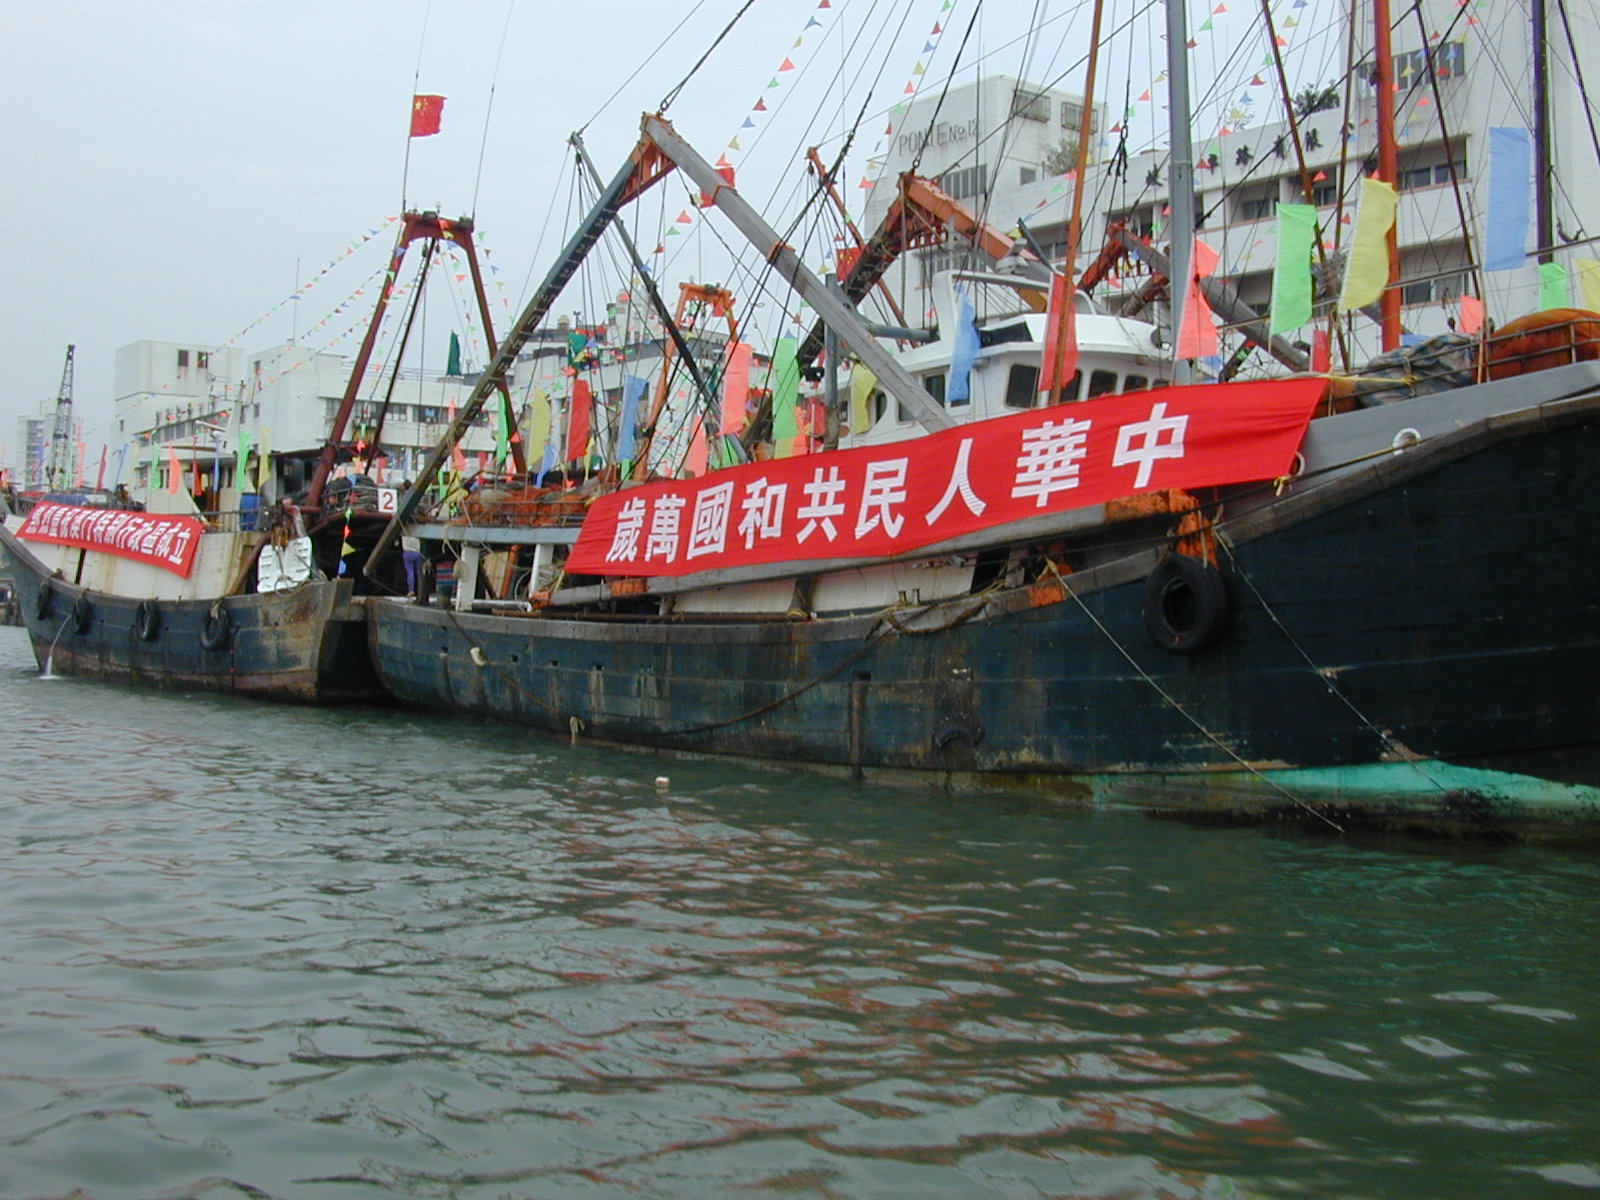 Decorated fishing boats